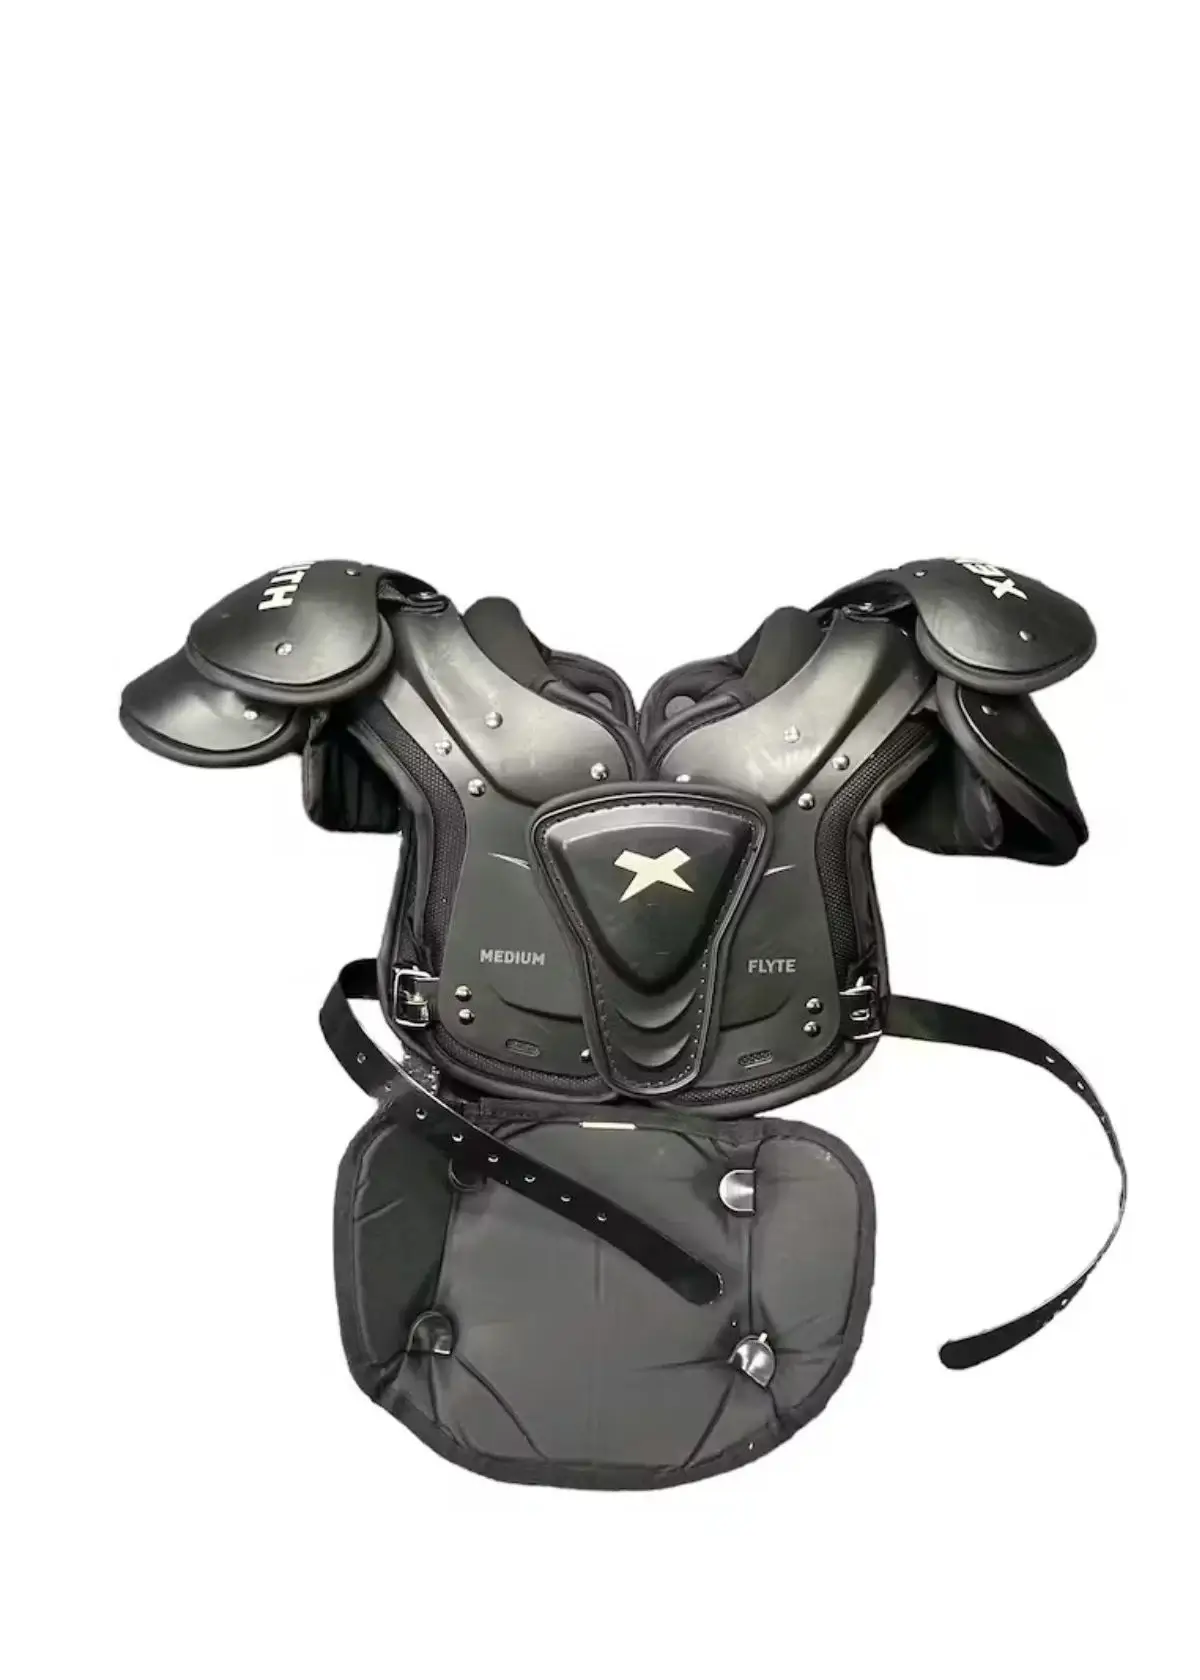 What materials are used to make football shoulder pads?